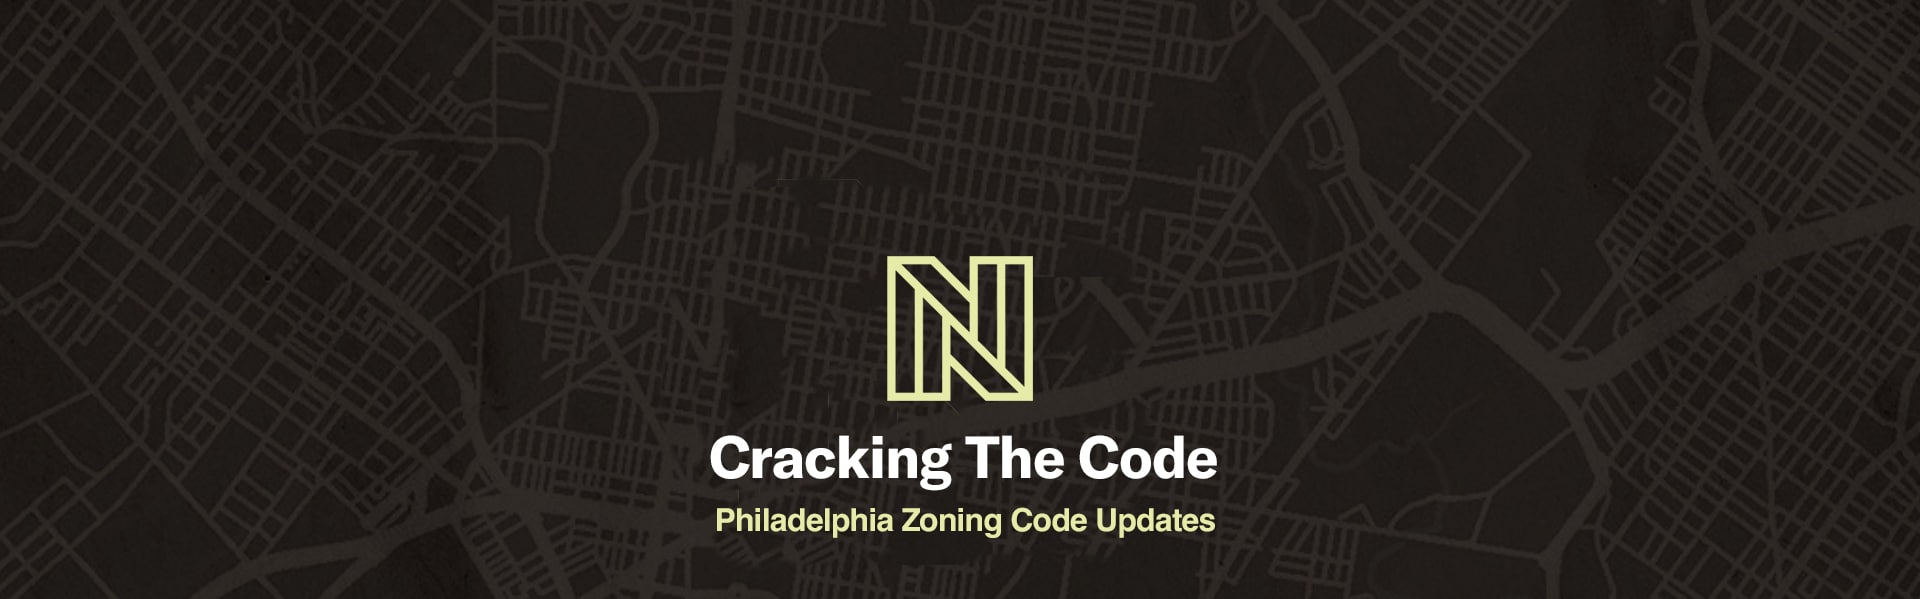 Newly Proposed Amendments to The Philadelphia Code Would Increase Information Regarding Income-Based Payment Agreements and Tax Relief Programs.